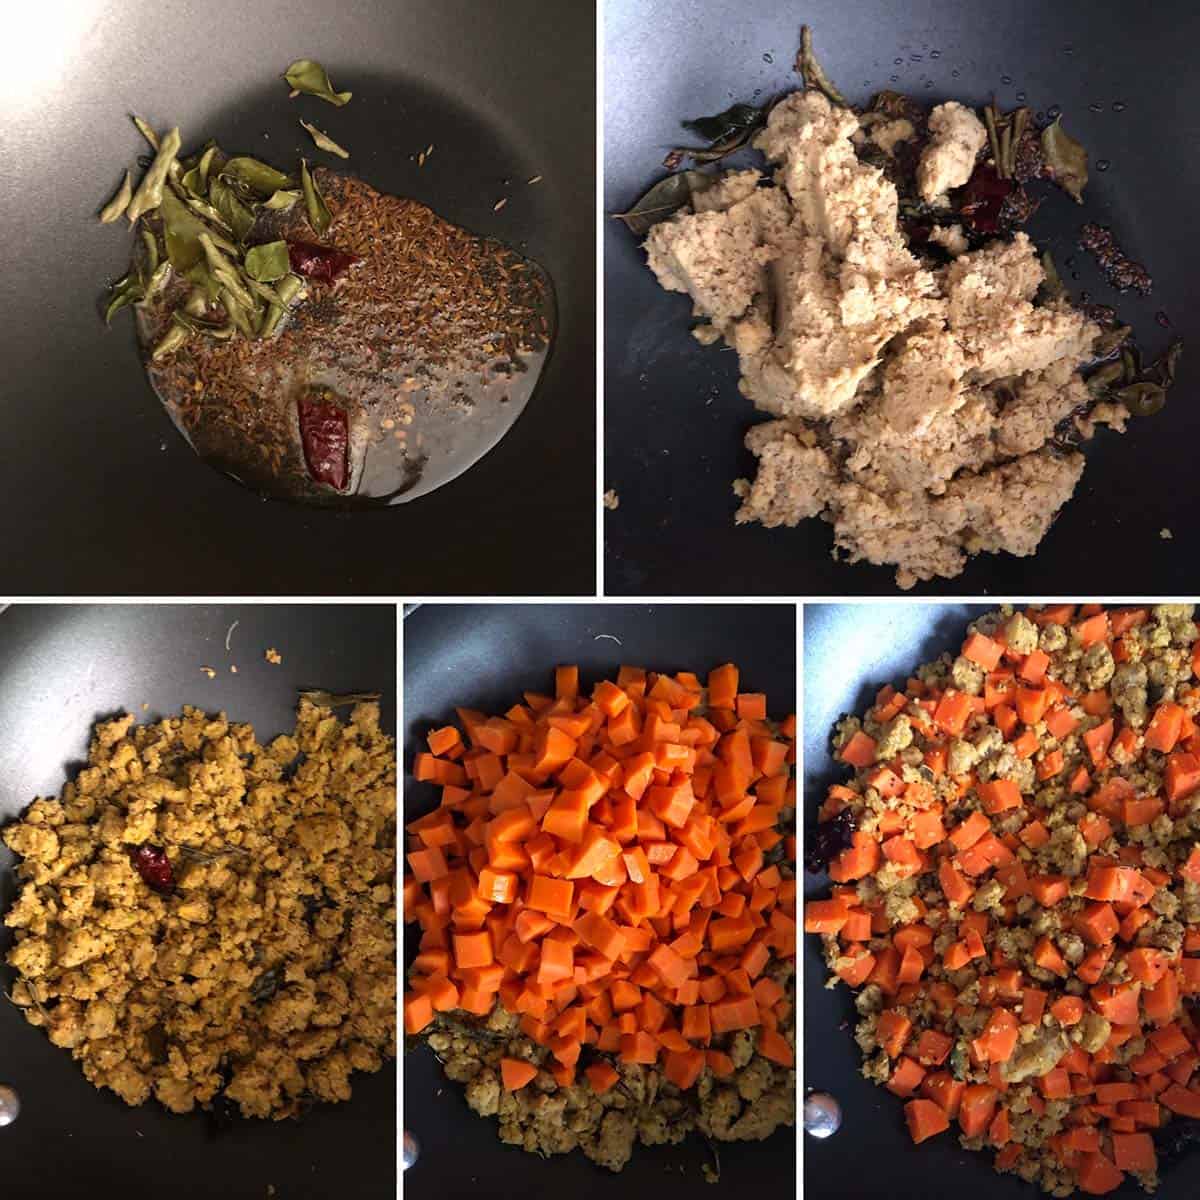 5 panel photo showing the cooking of ingredients in a pan.